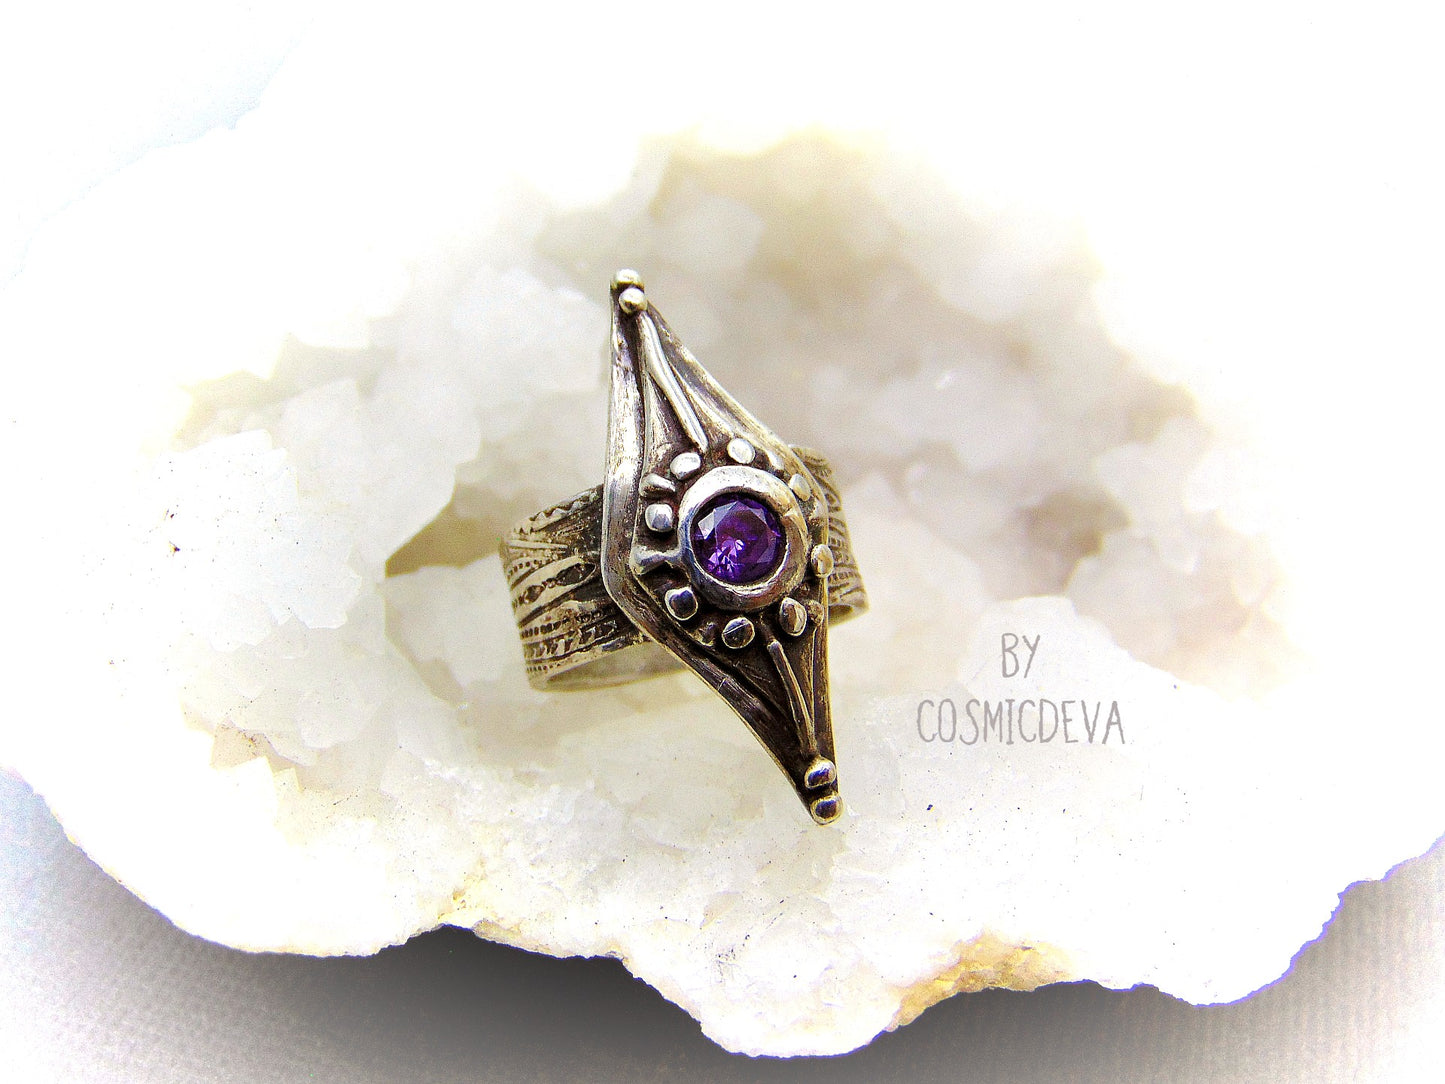 Medieval Wide Band Sterling Silver Shield Ring with Amethyst, Size 8 Ring. Unique and stunning handcrafted diamond shape shield sterling silver ring with a 5 mm round amethyst sto. ne. This Ring is made of .950 sterling silver and hallmarked as it. The ring was oxidized to give it a vintage antique design. - CosmicDeva